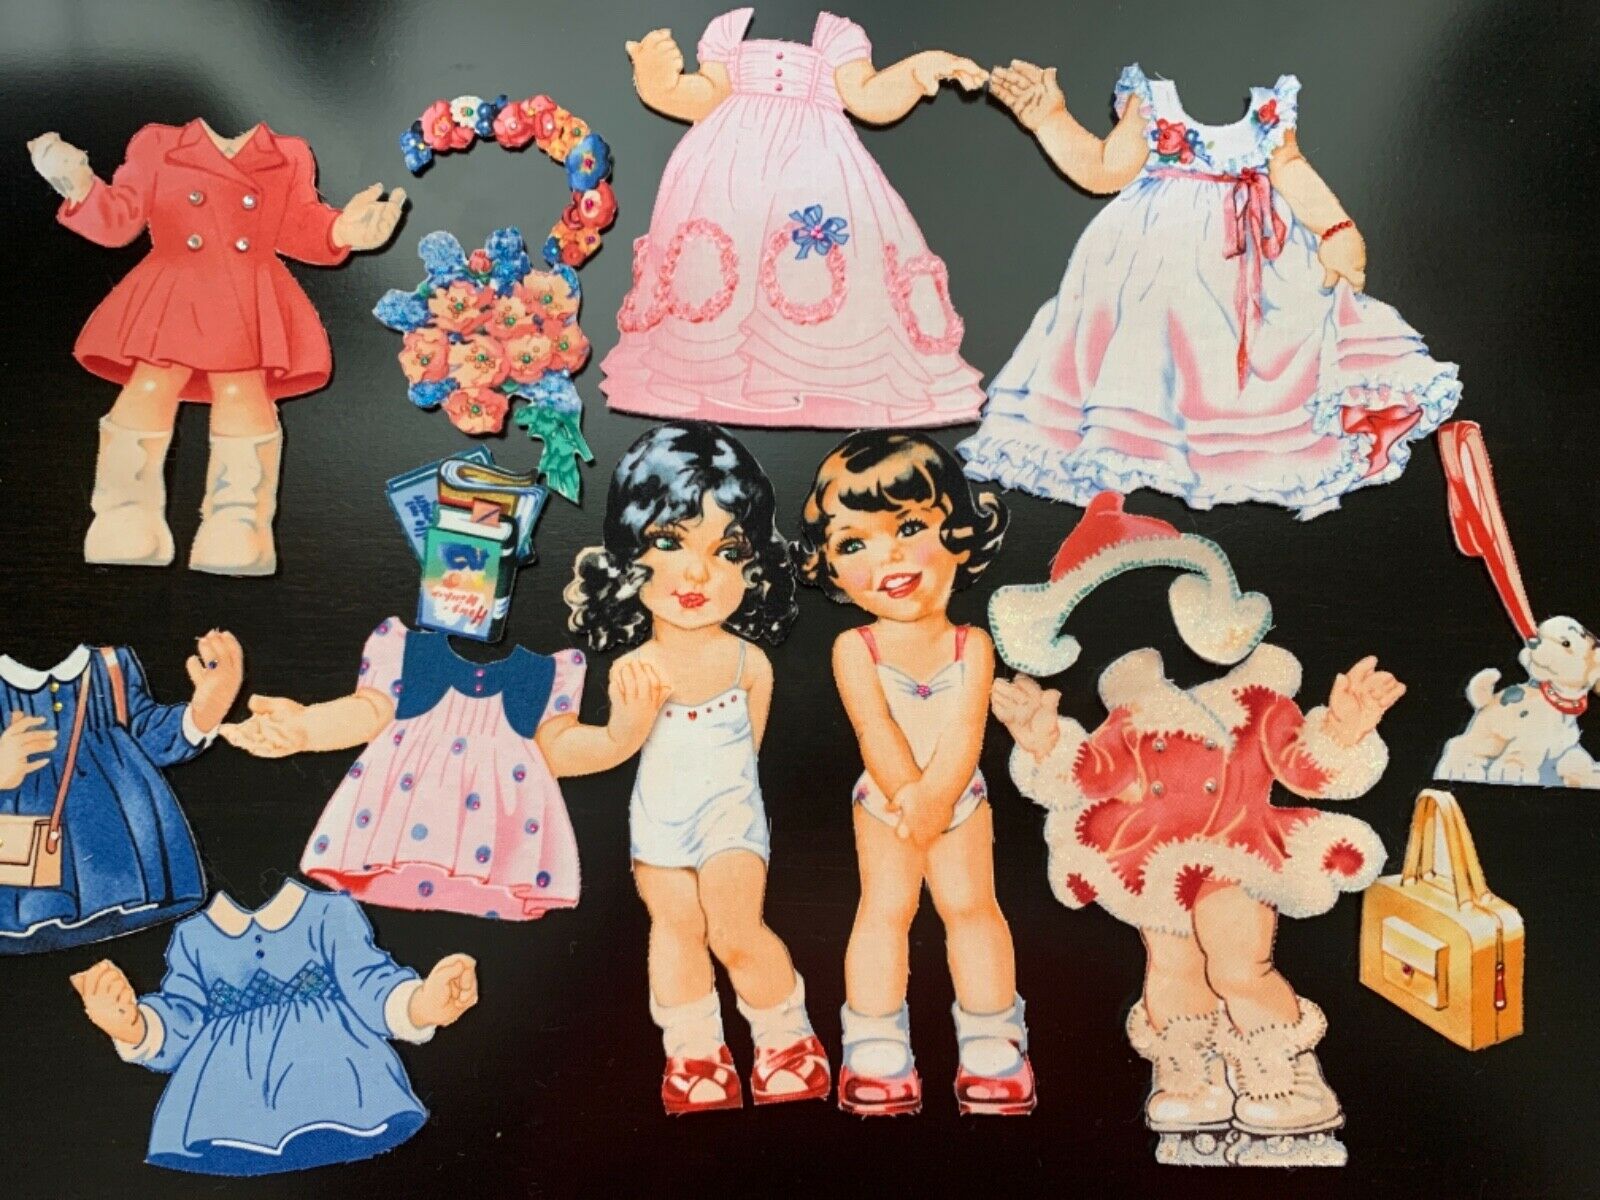 Dancing Girls Chester County Fabric Paper Dolls With Clothing & Accessories